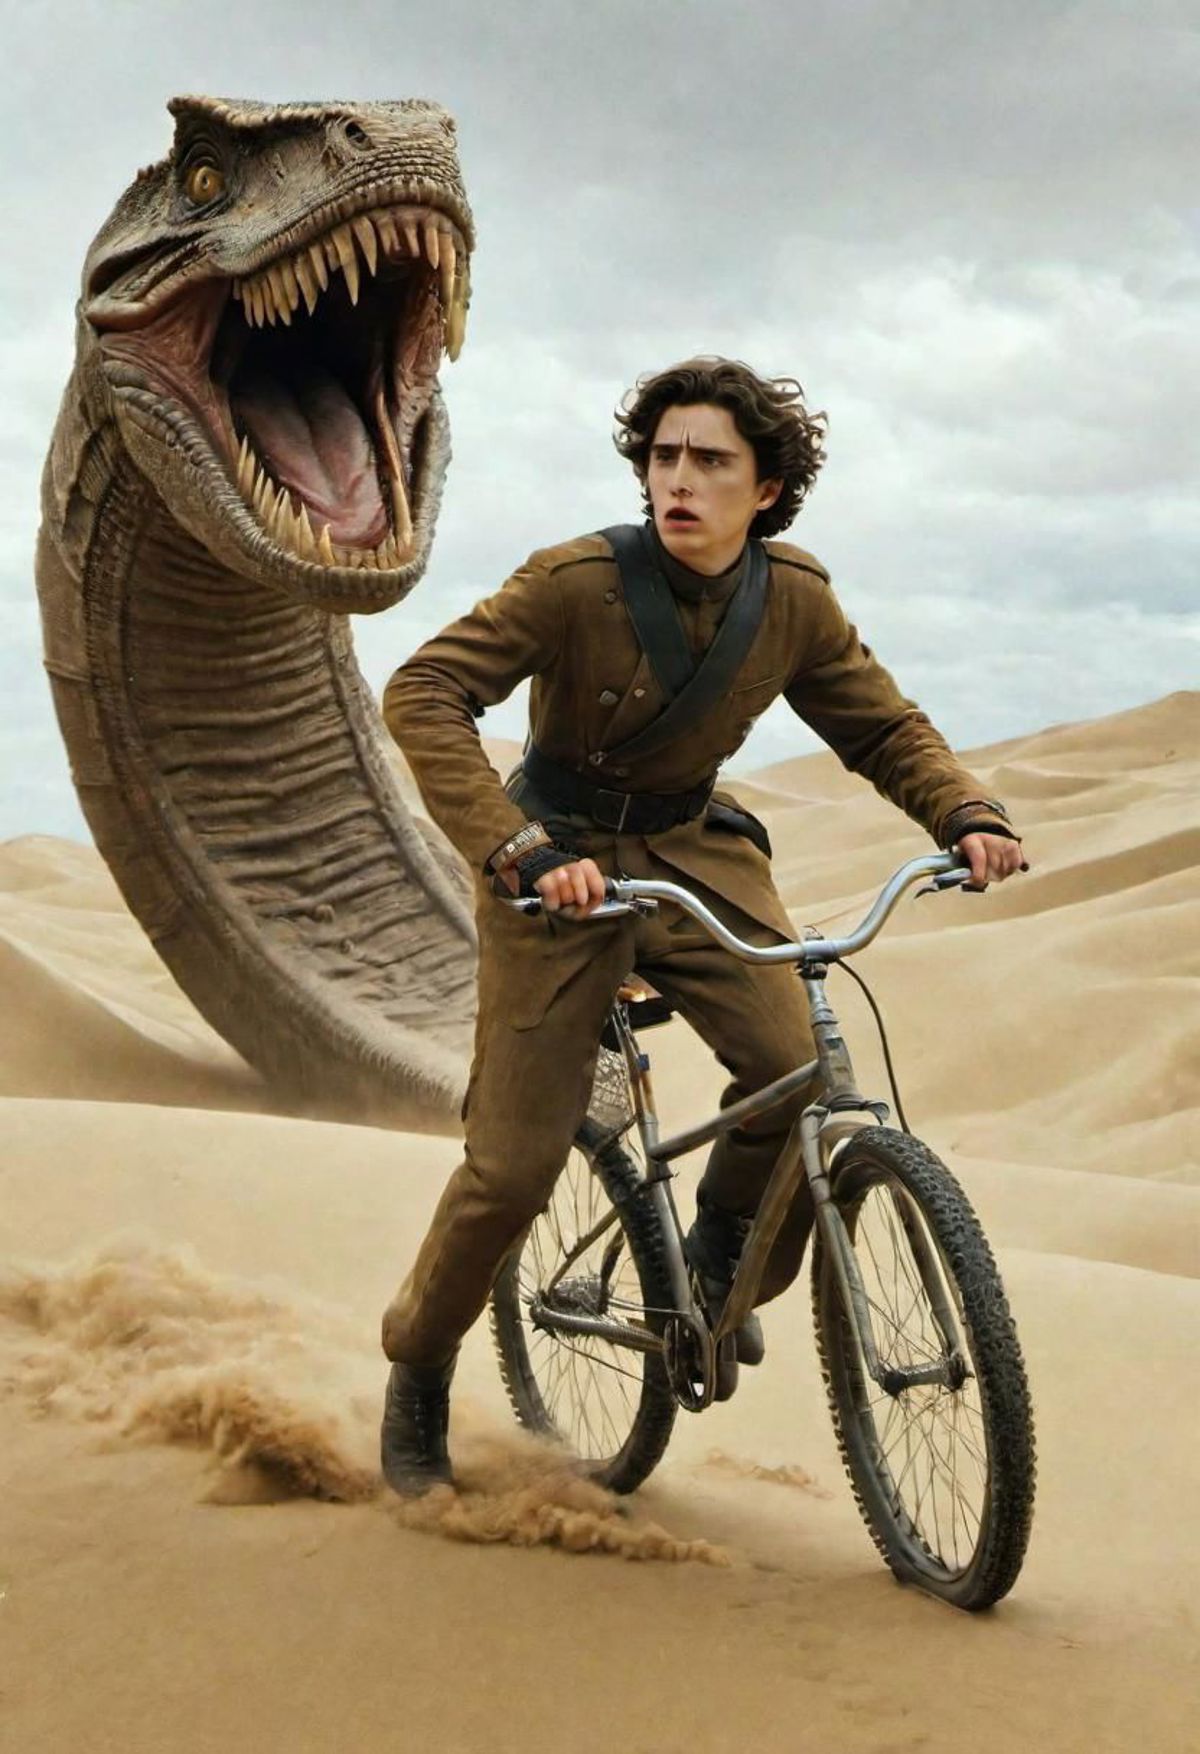 A man riding a bike in a desert, with a giant snake behind him.